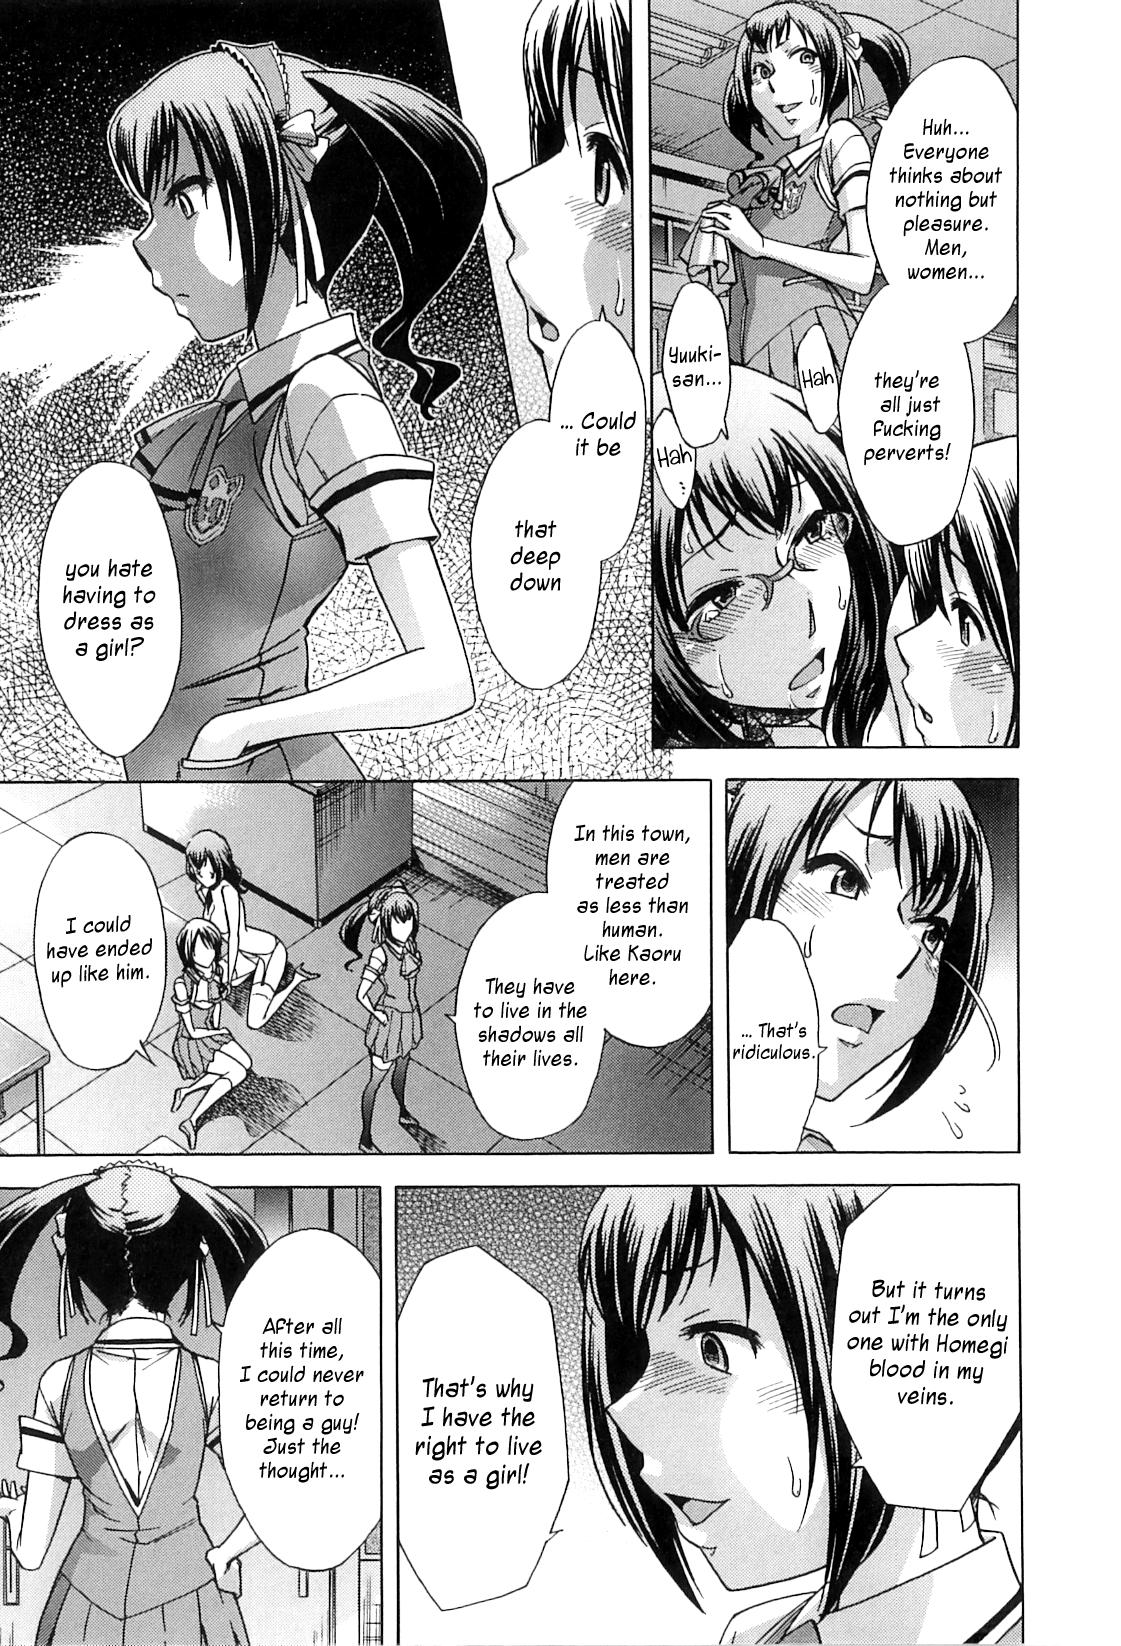 After School Tin Time chapter 1-3 32